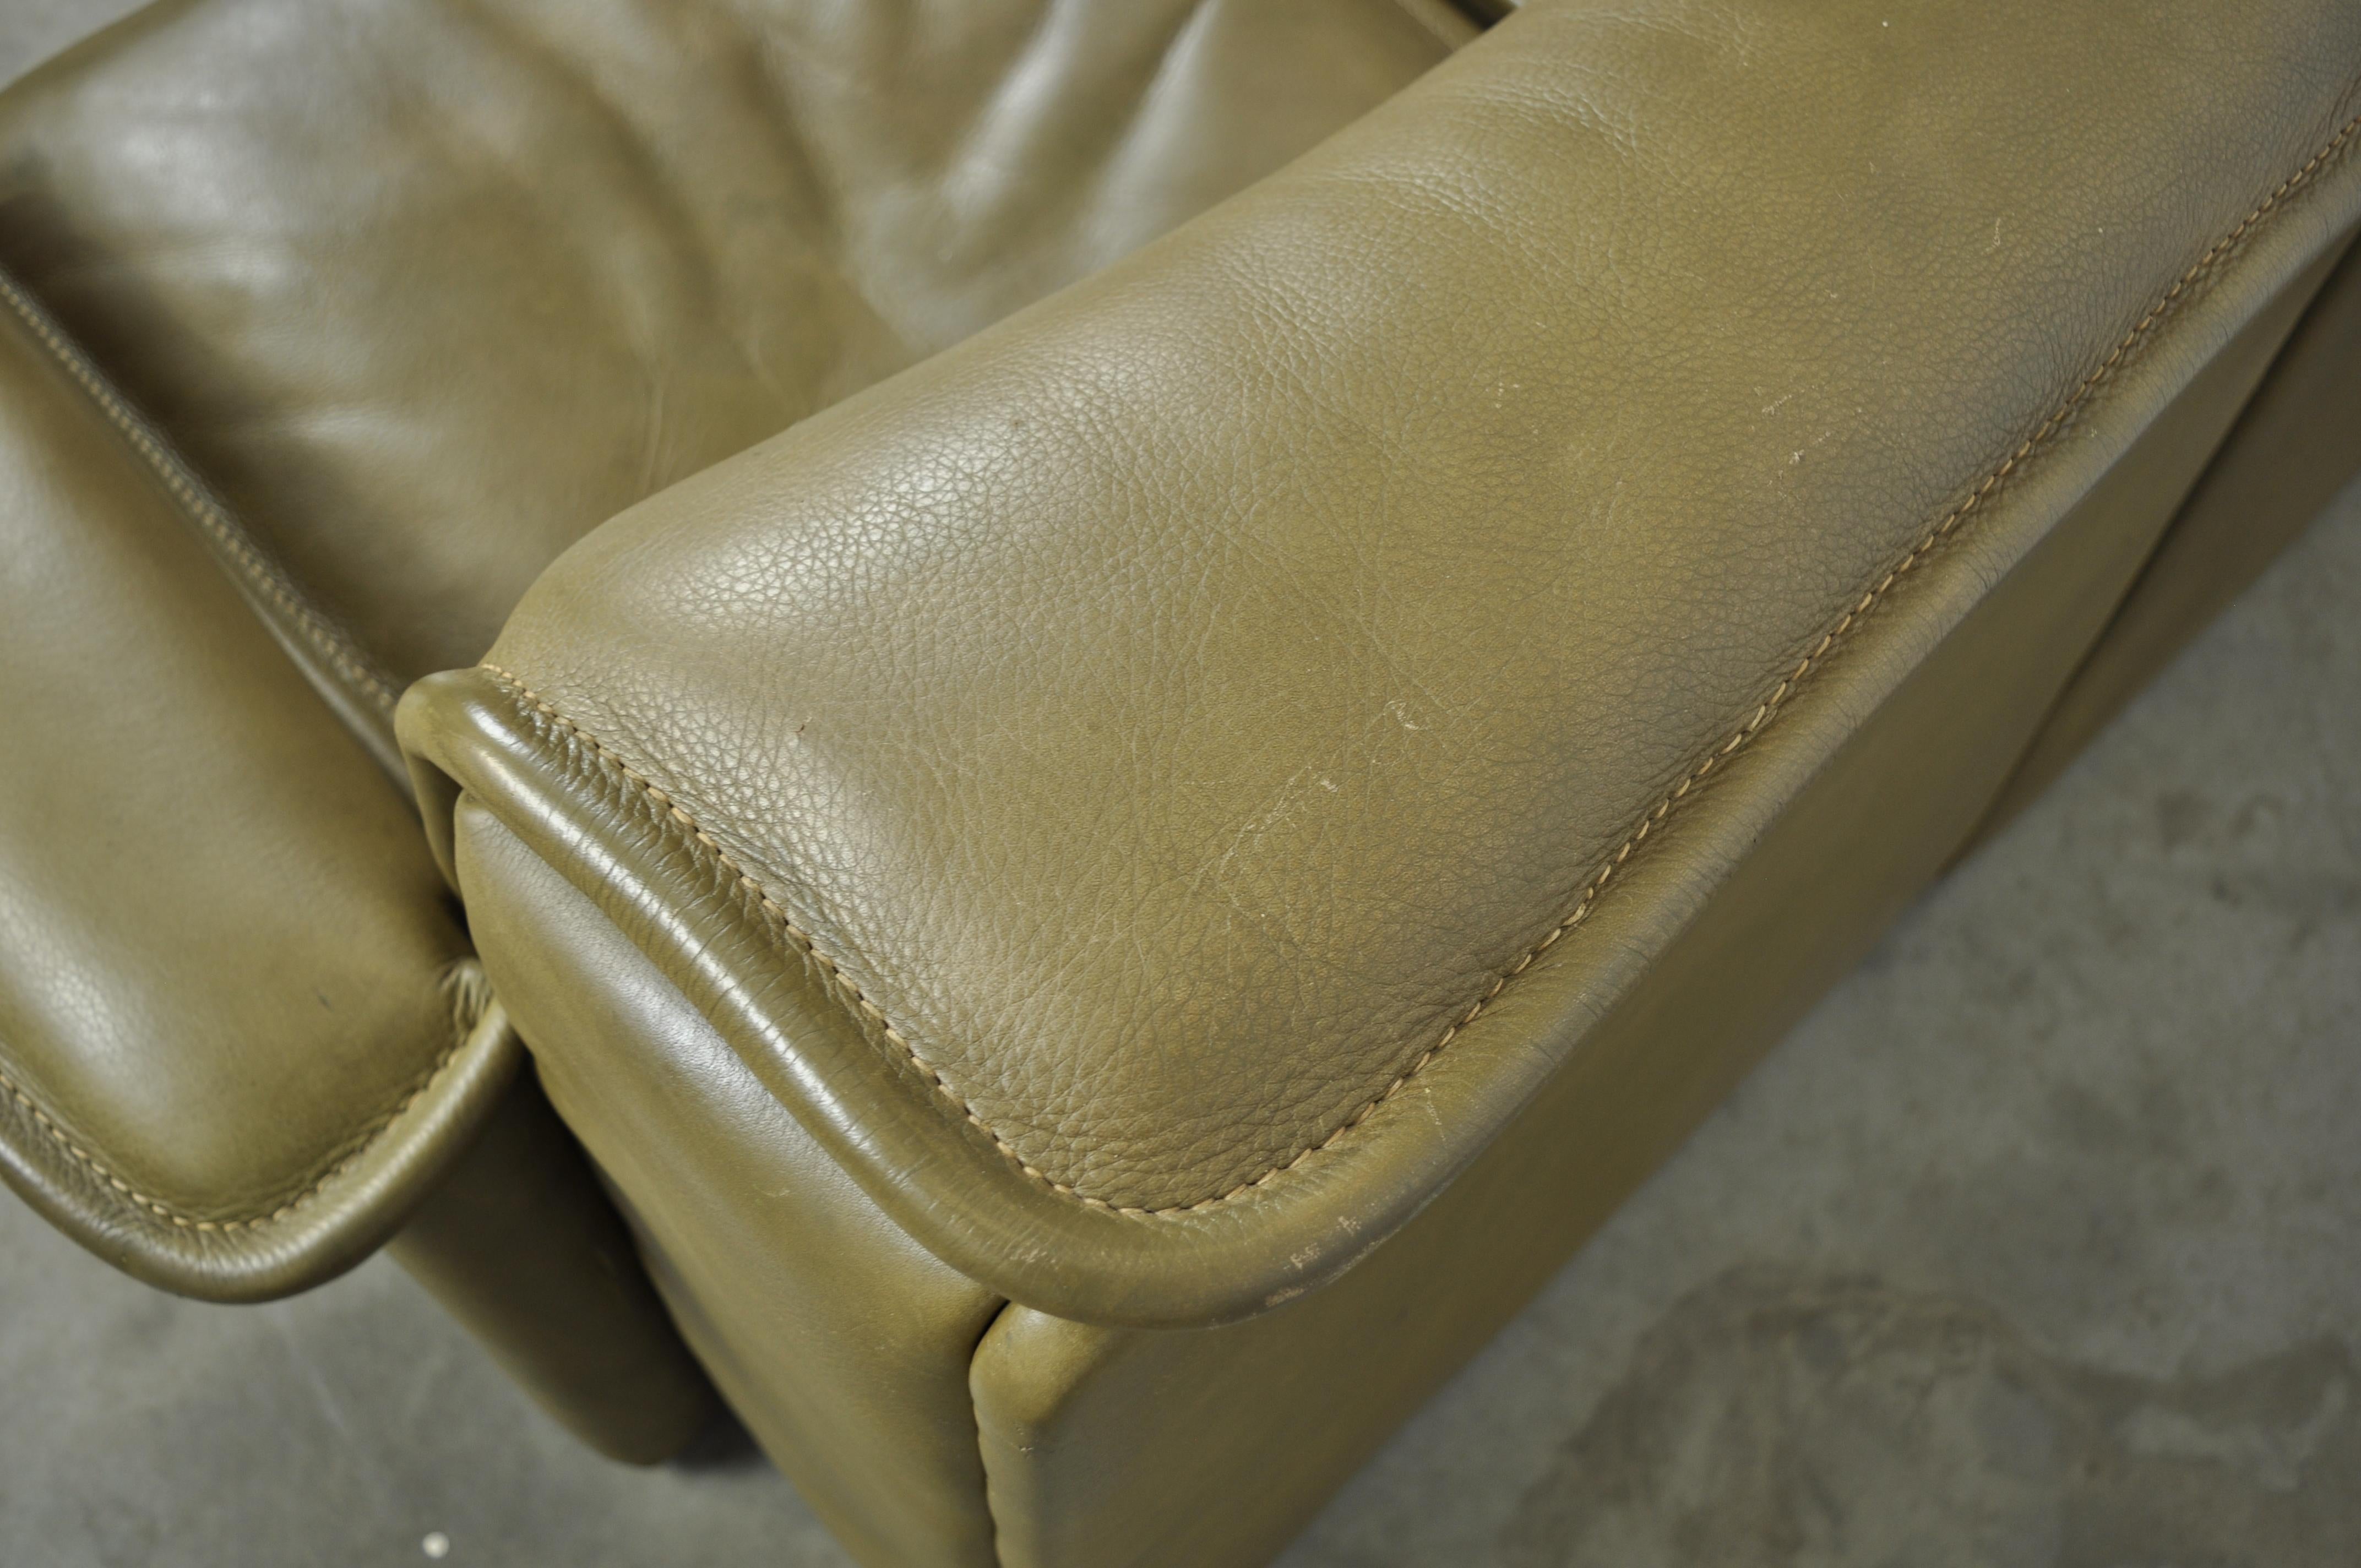 Olive Colored Leather 3-Seater Sofa, Model Ds-12 by De Sede, 1970s Switzerland For Sale 4